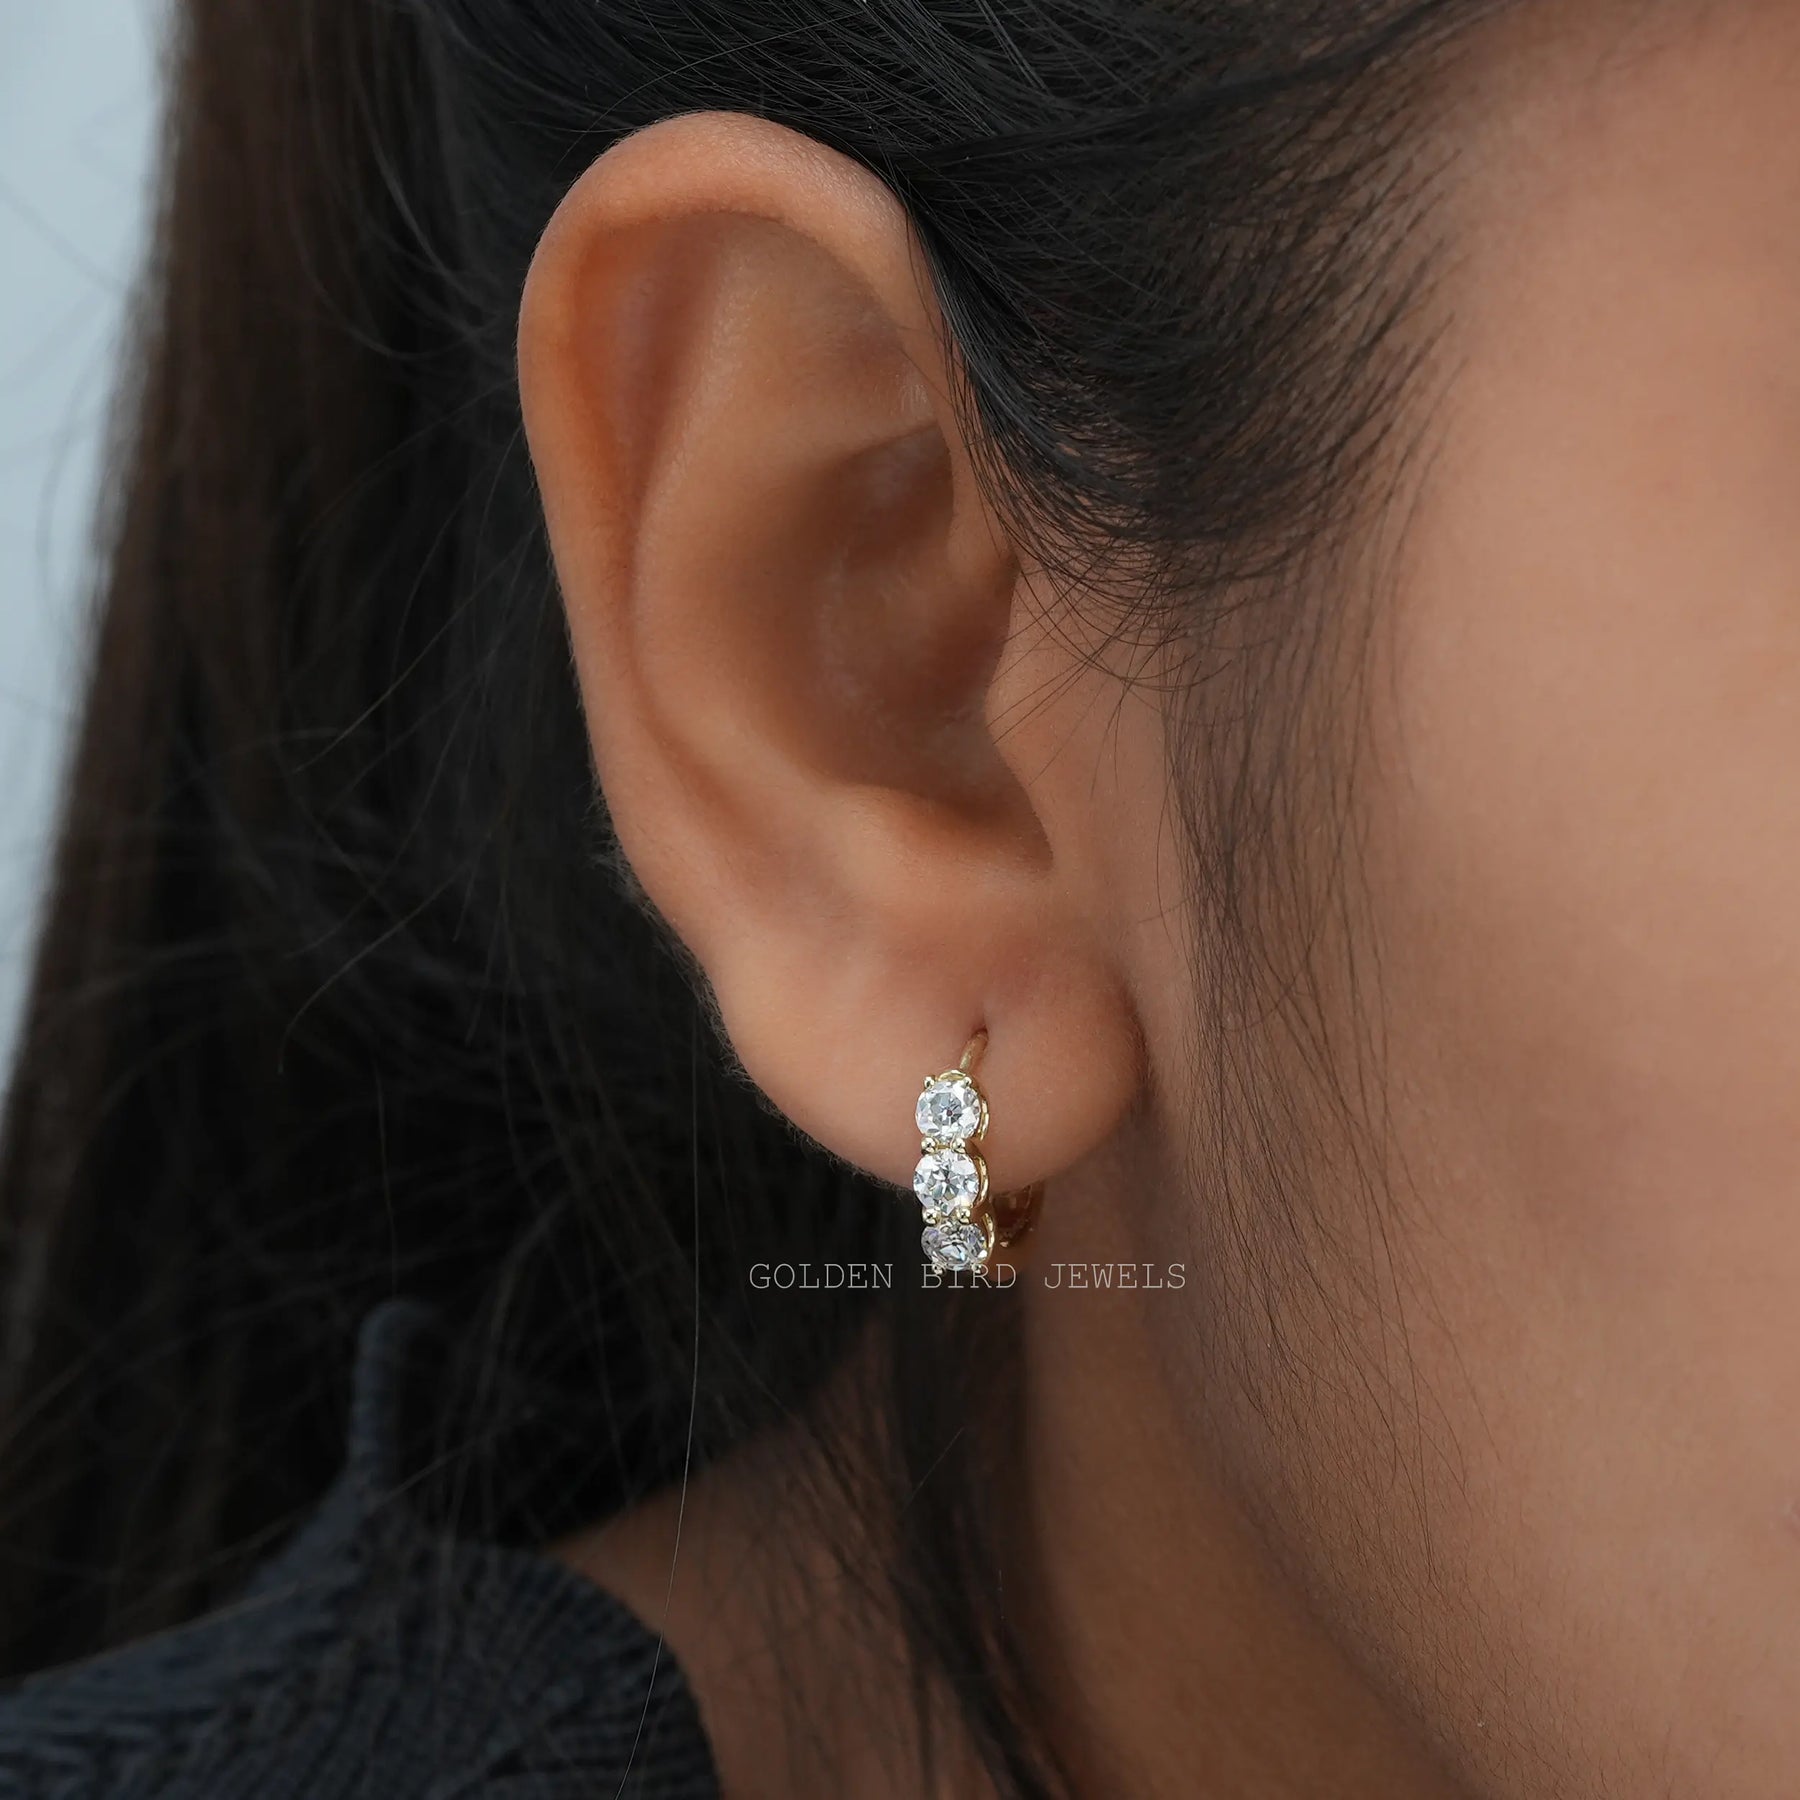 [This OEC round cut moissanite earrings made of prong setting]-[Golden Bird Jewels]